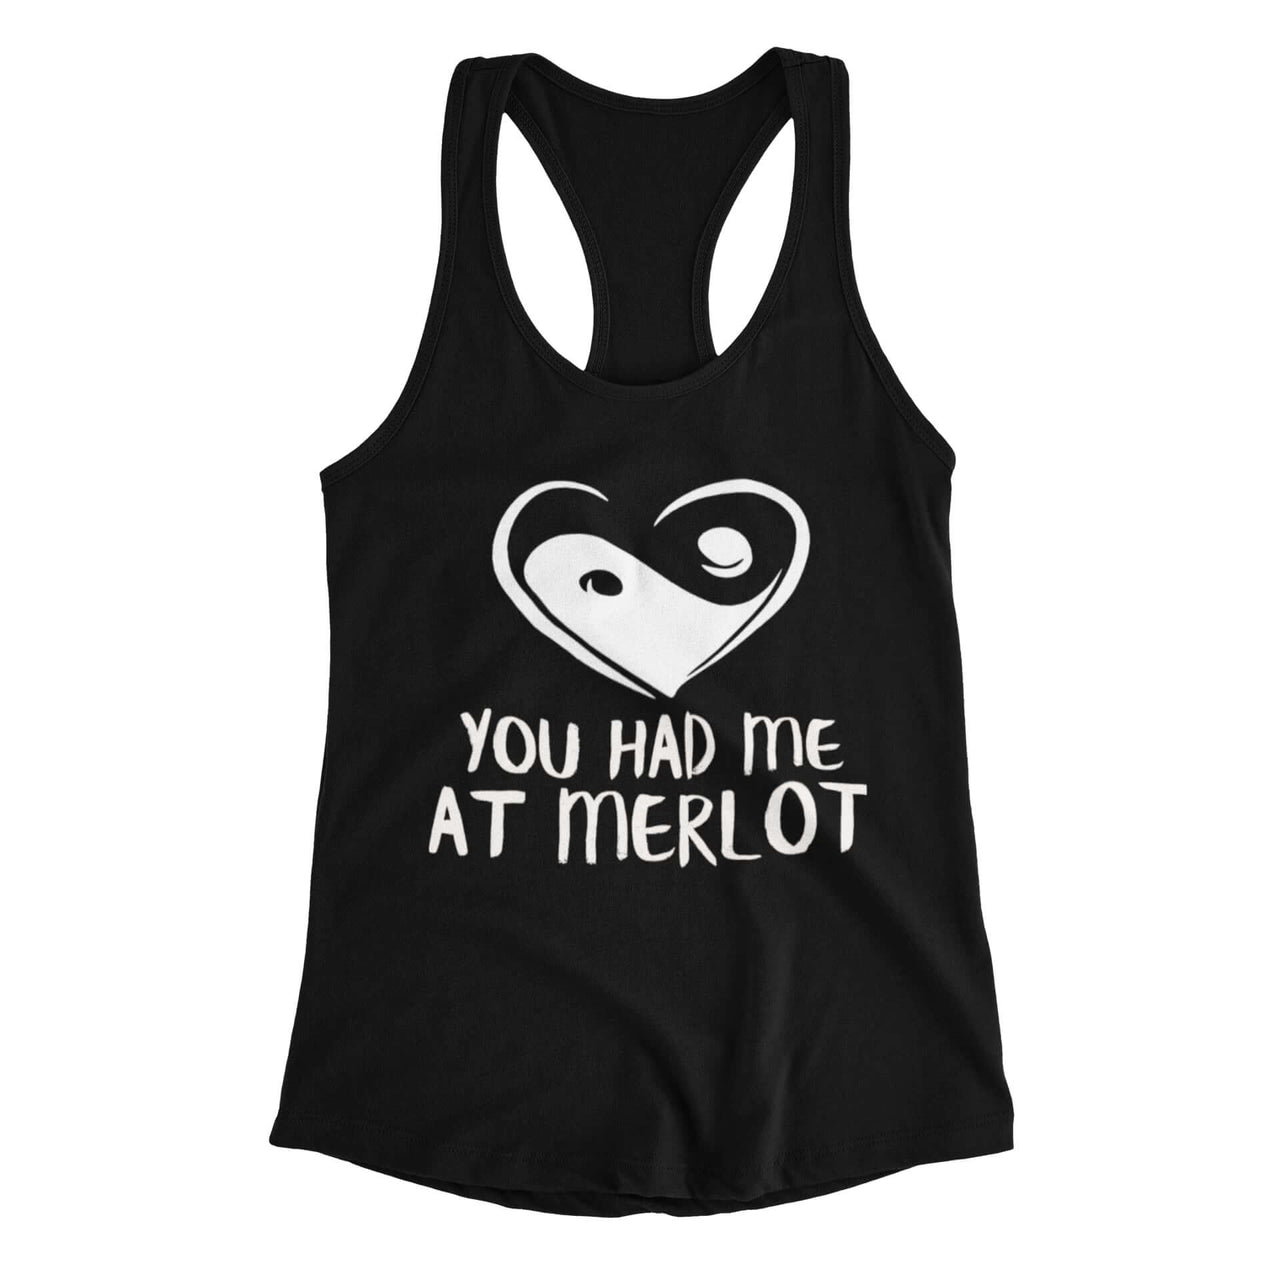 Racerback Shirt with heart yin yang symbol and text 'you had me at merlot,' designed by WooHoo Apparel."